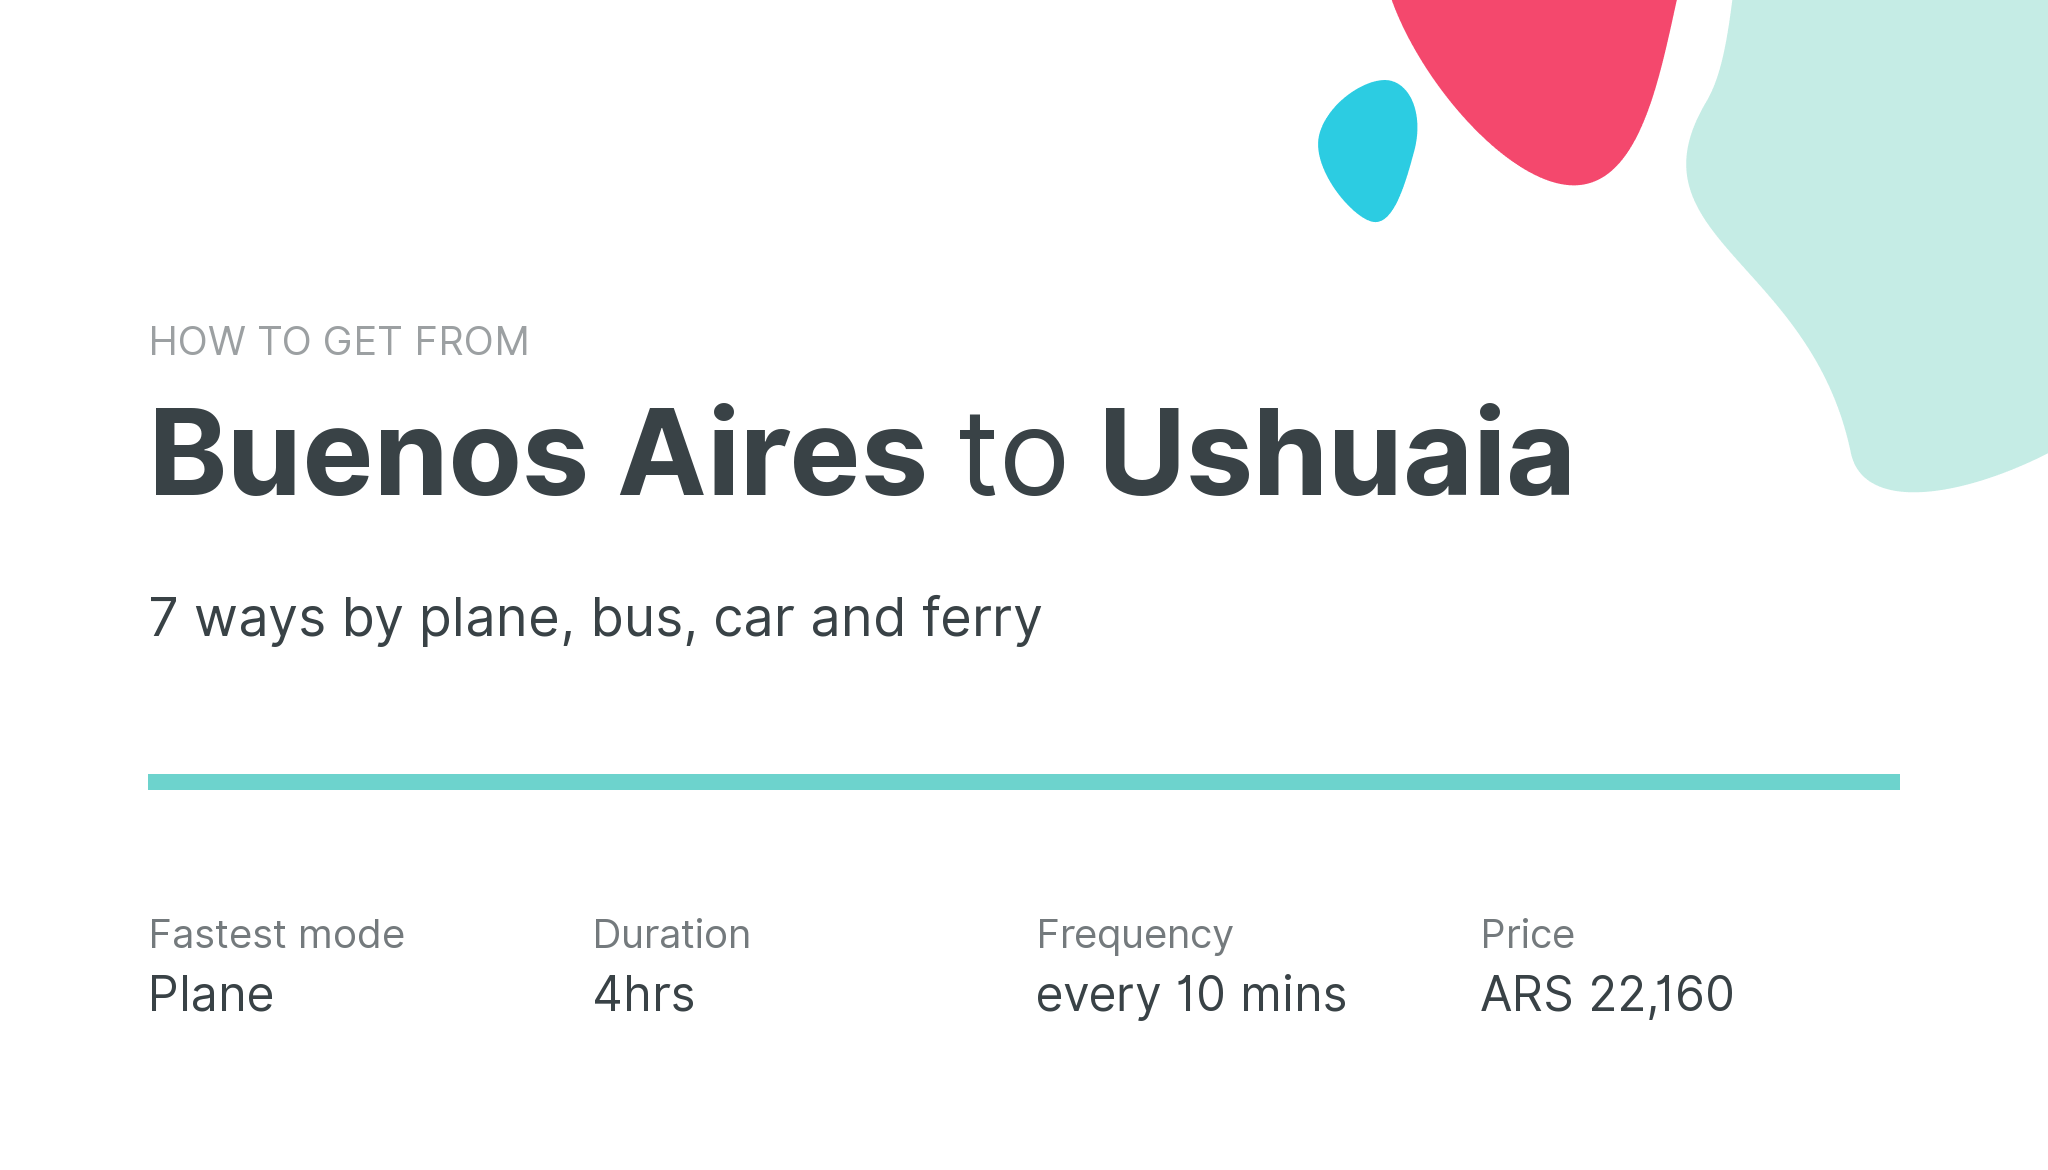 How do I get from Buenos Aires to Ushuaia